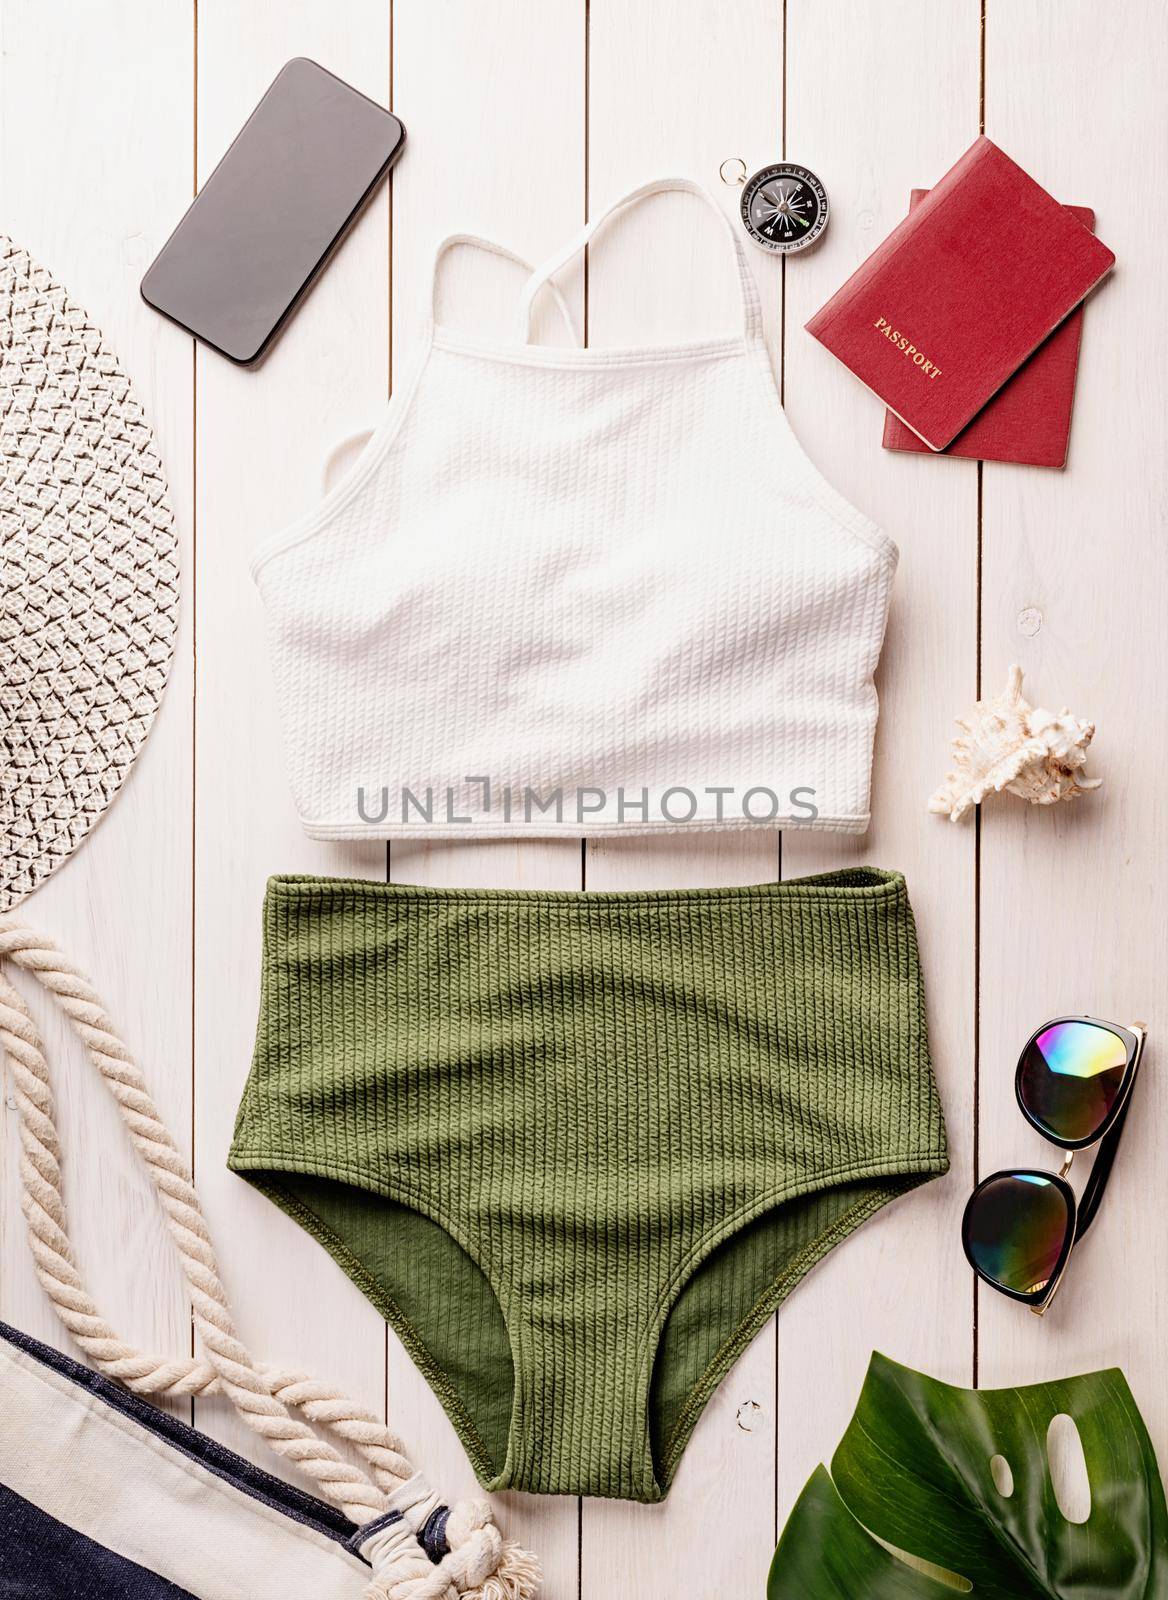 Travel and vacation concept. Flat lay travelling objects with swimsuit, smartphone, passports, sunglasses and compass on white wooden background